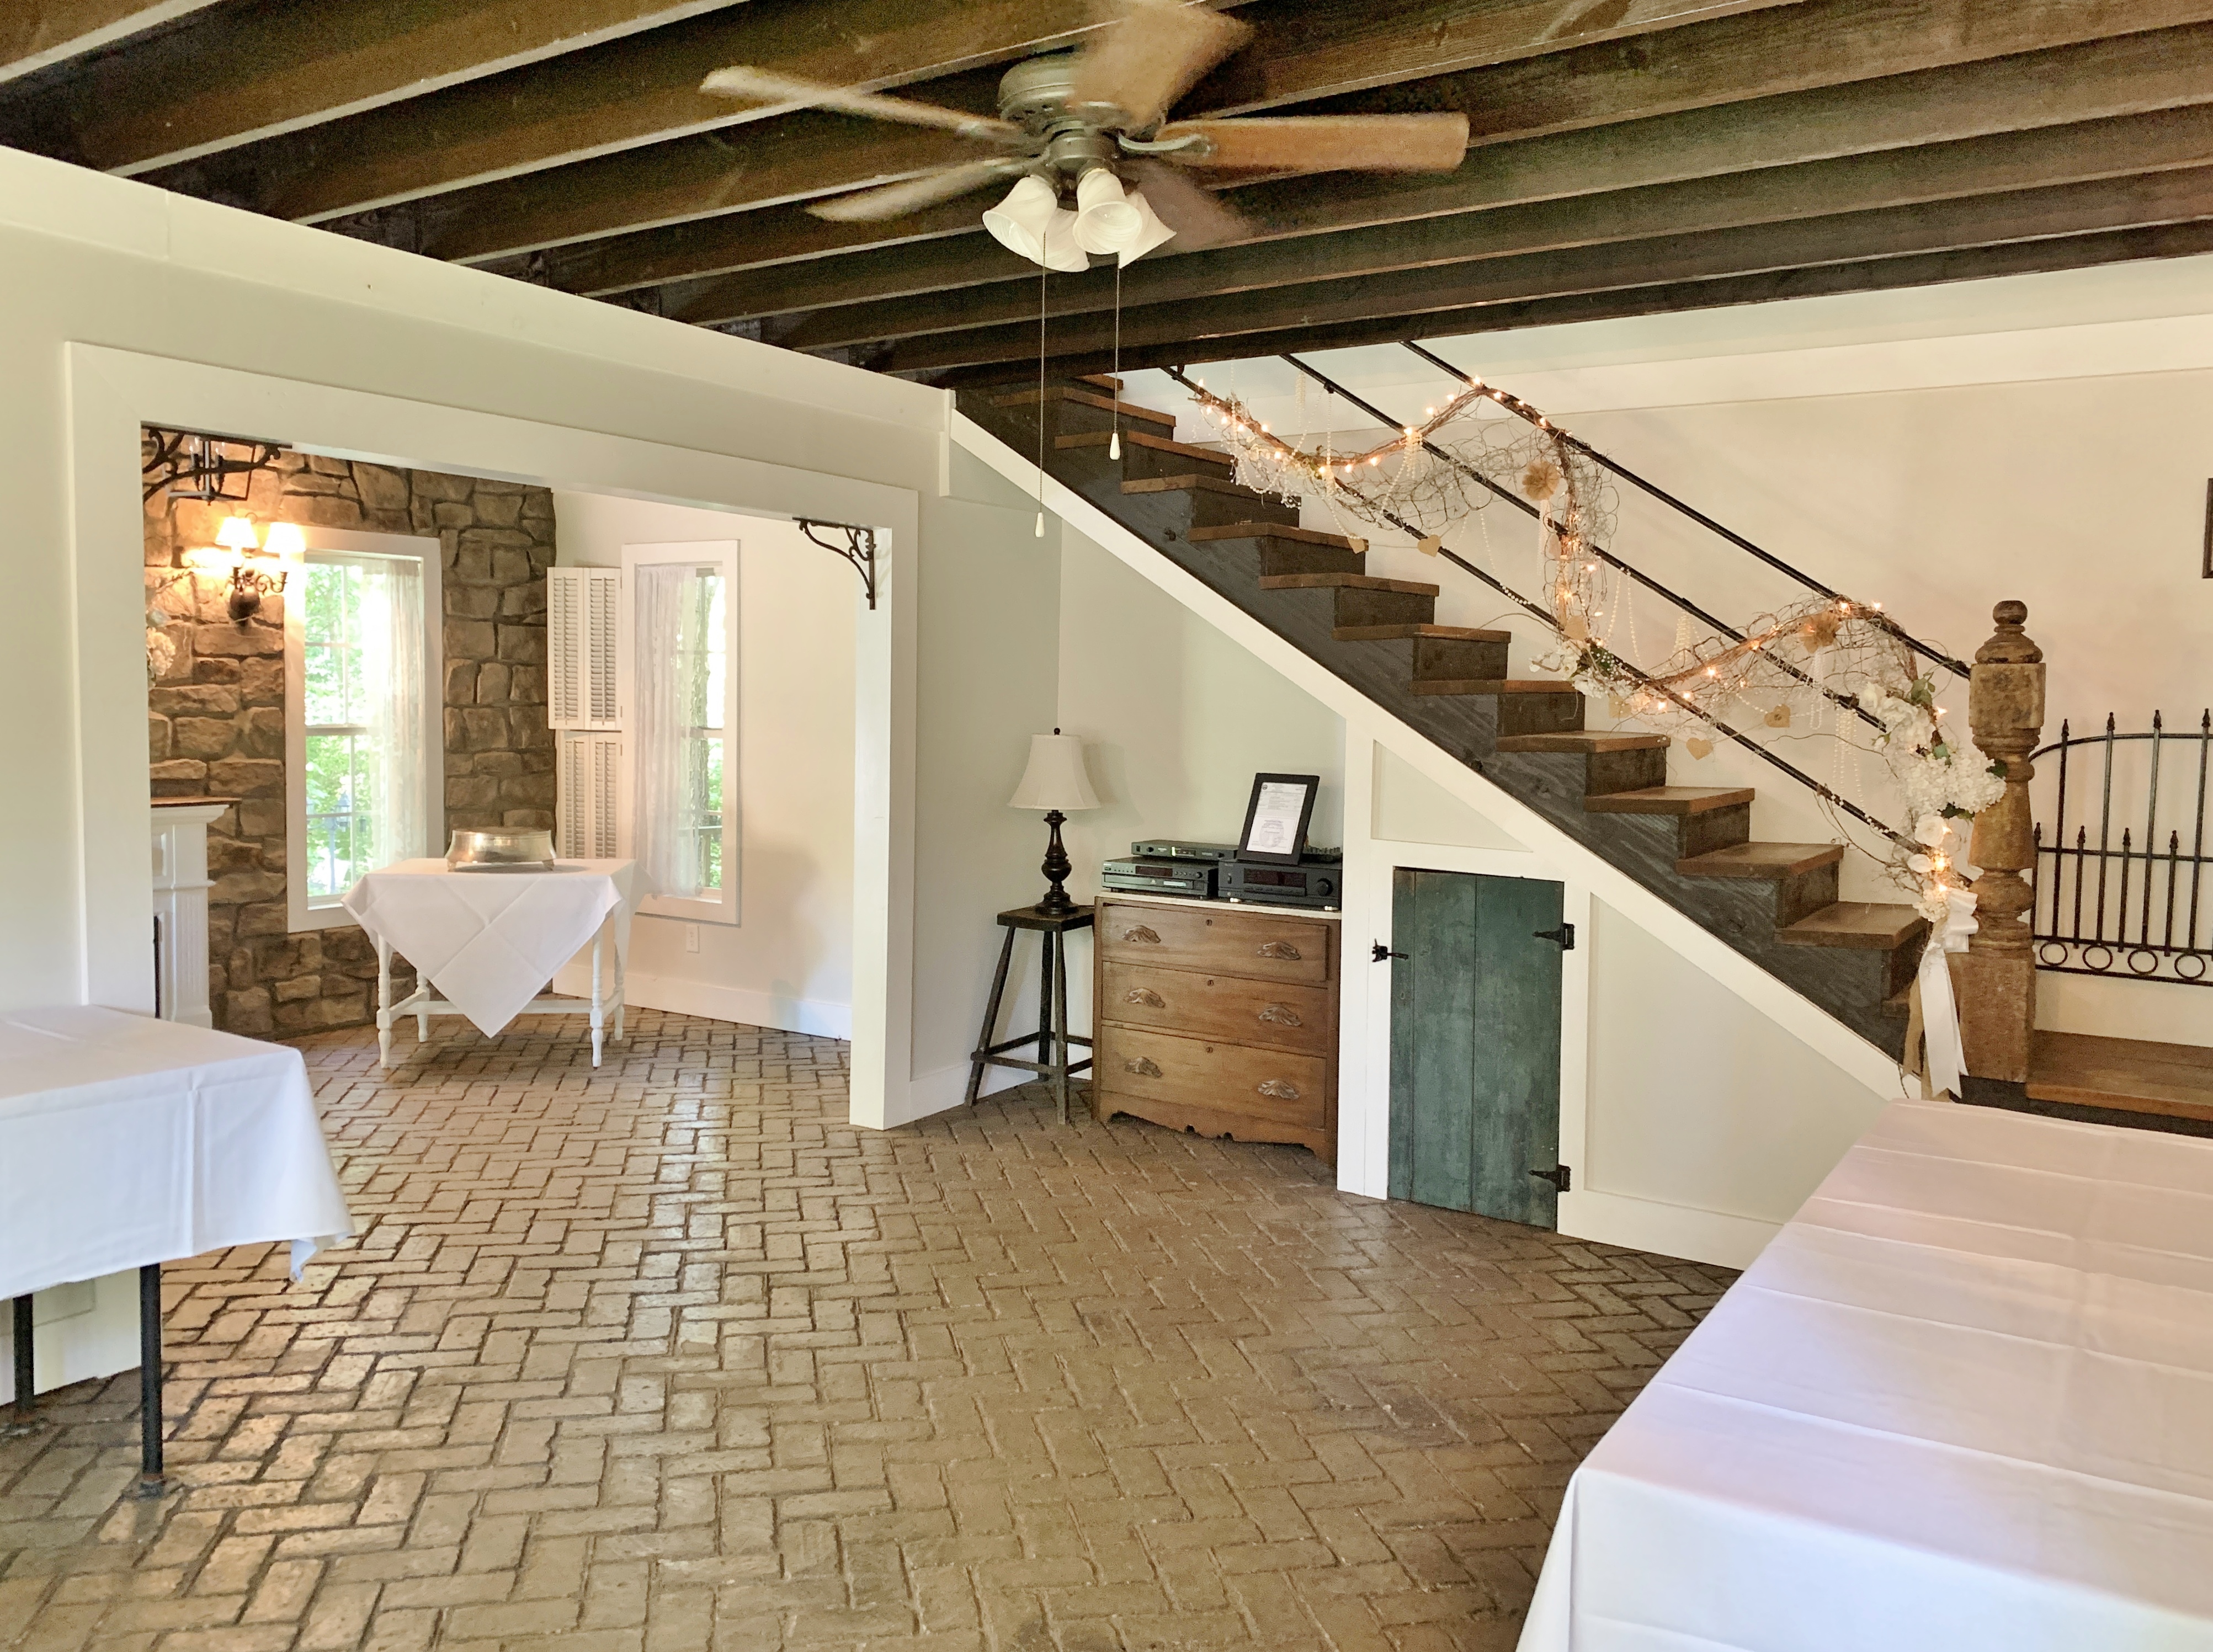 Interior photo of cottage showing stairs, buffet tables, cake table, and brick flooring.